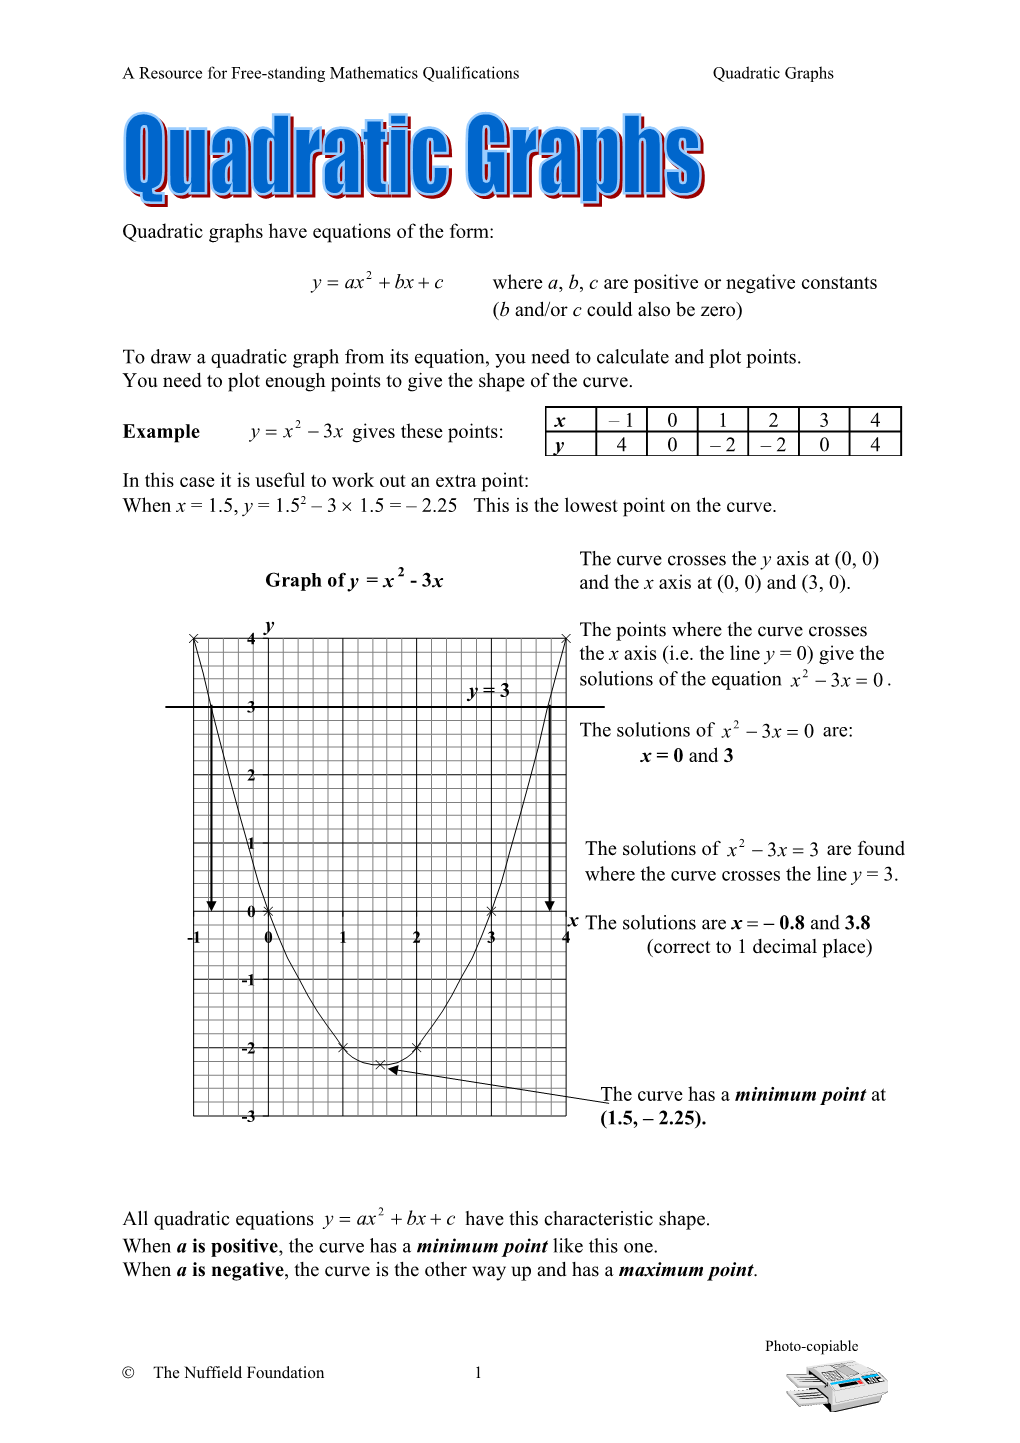 A Resource for Free-Standing Mathematics Qualificationsquadratic Graphs